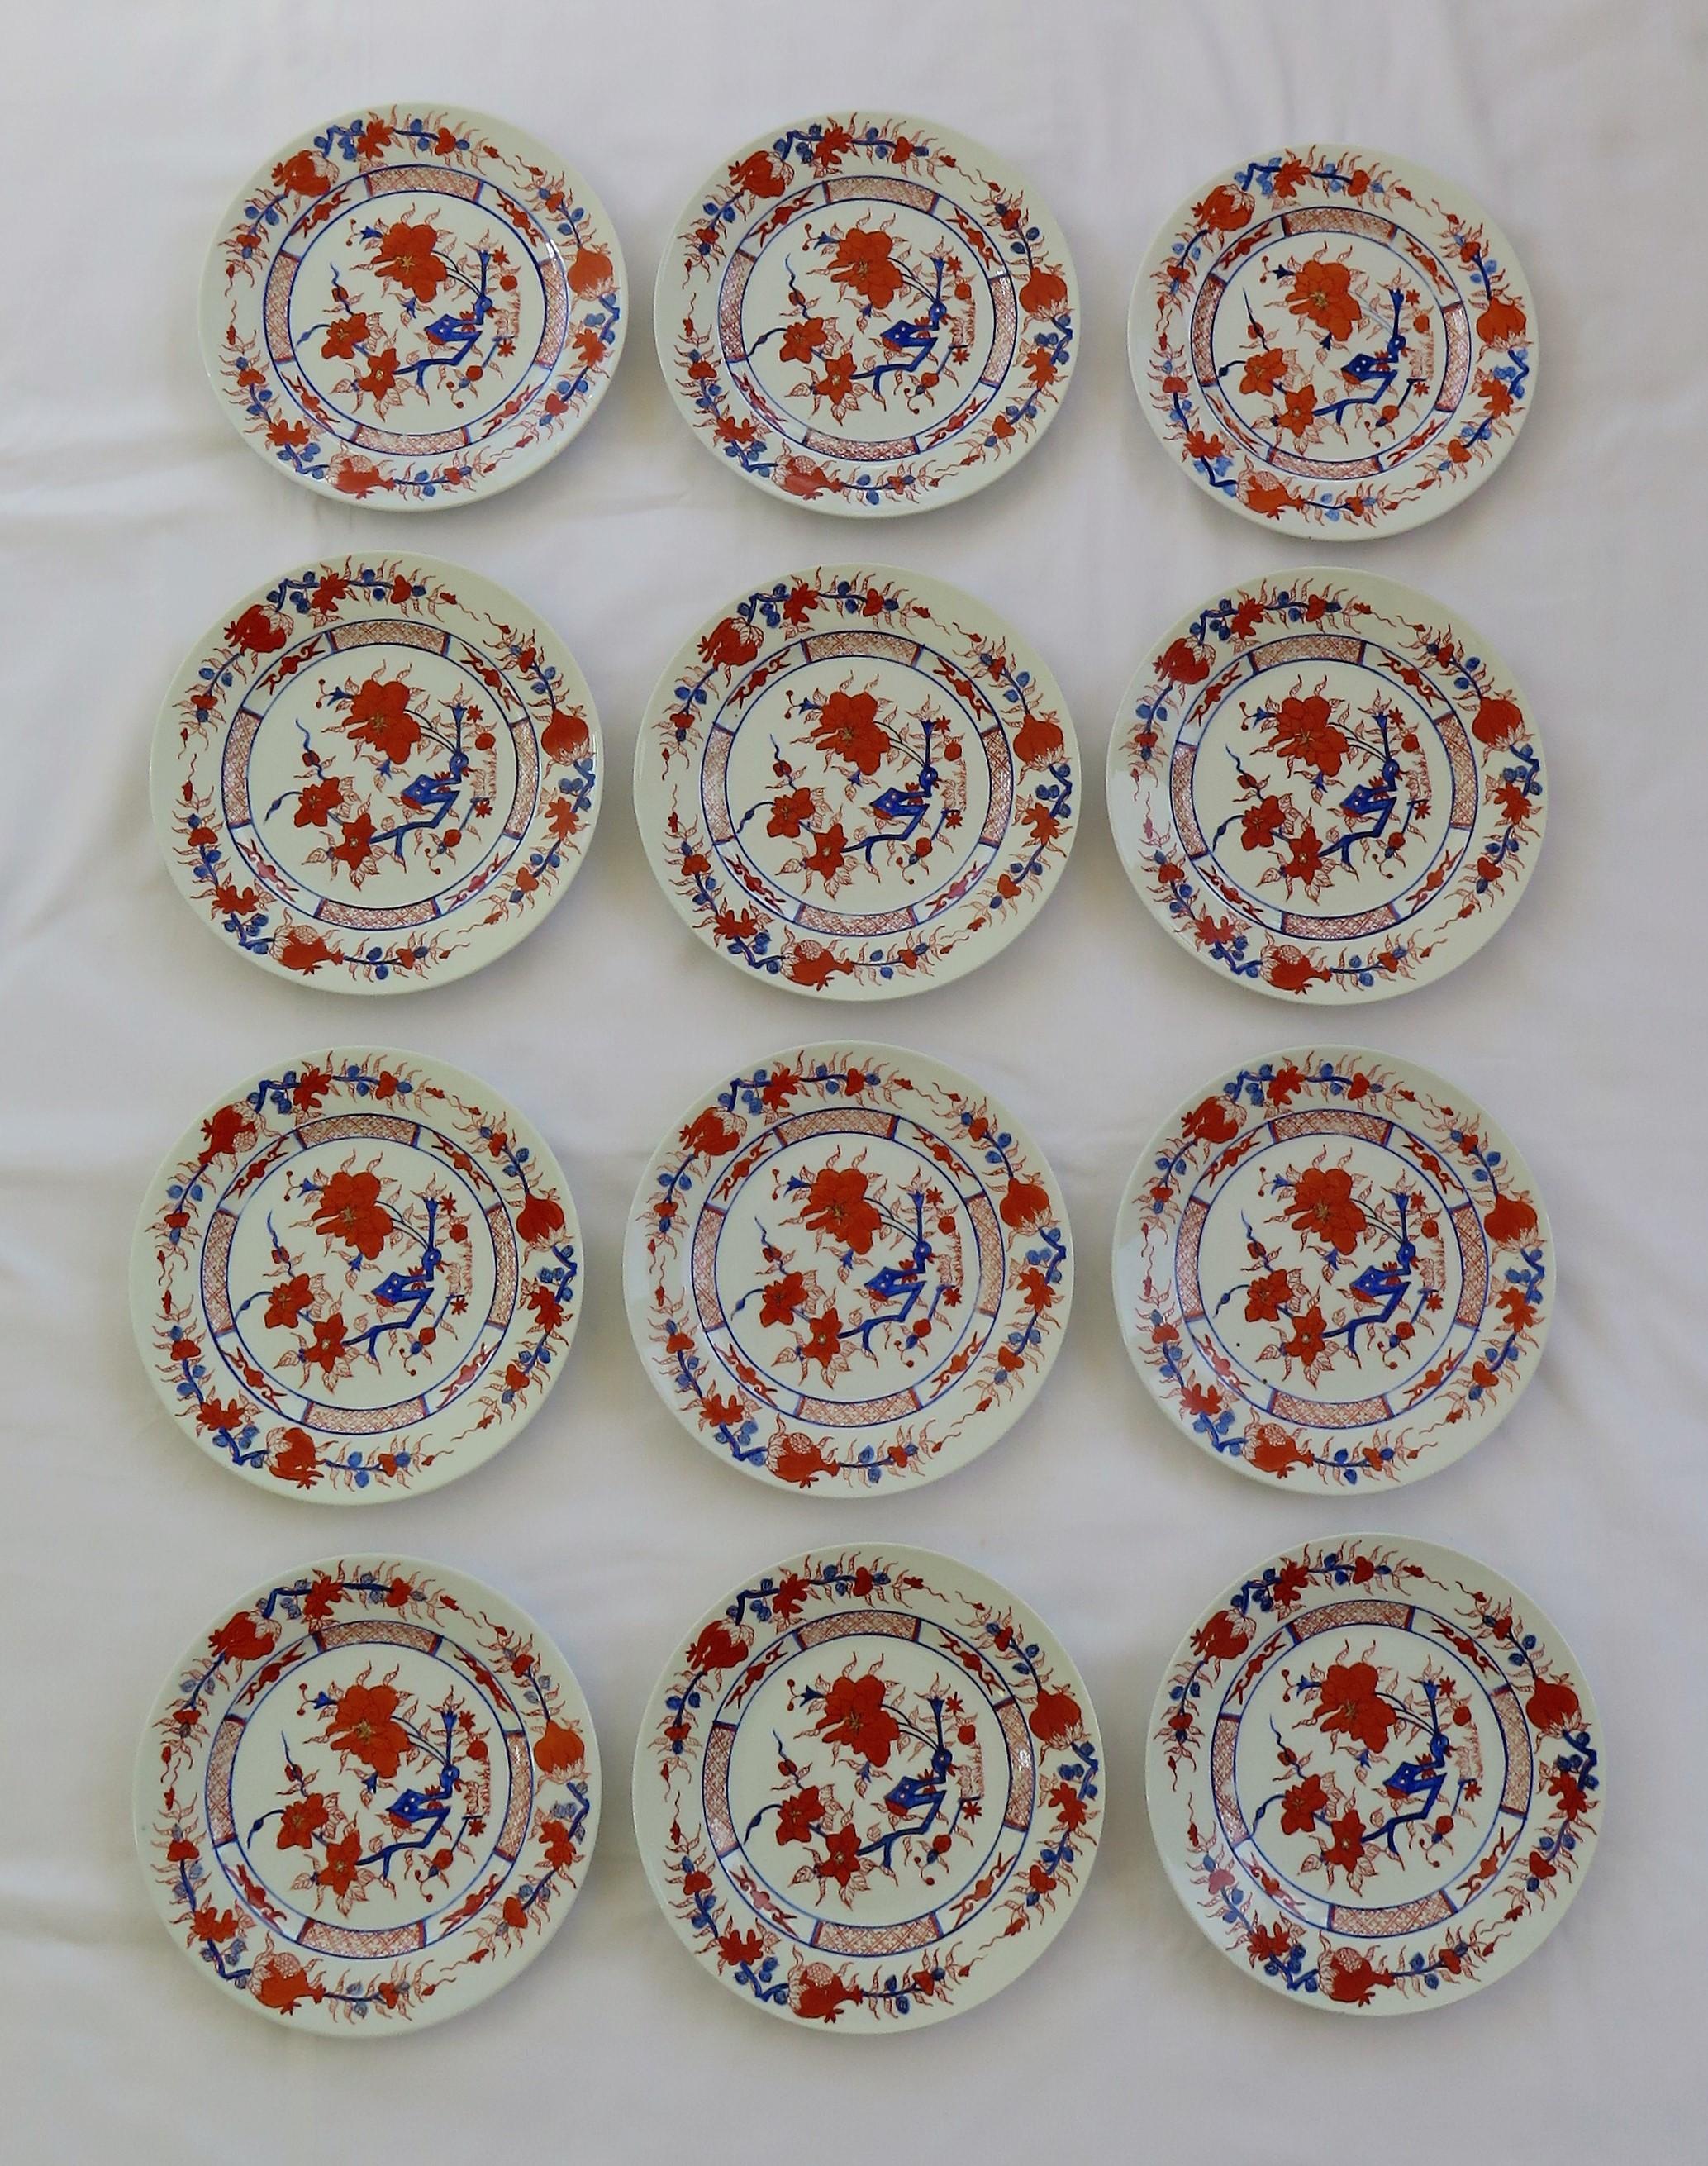 Hand-Painted Set of 12 Chinese Export Porcelain Side Plates, Mid-20th Century